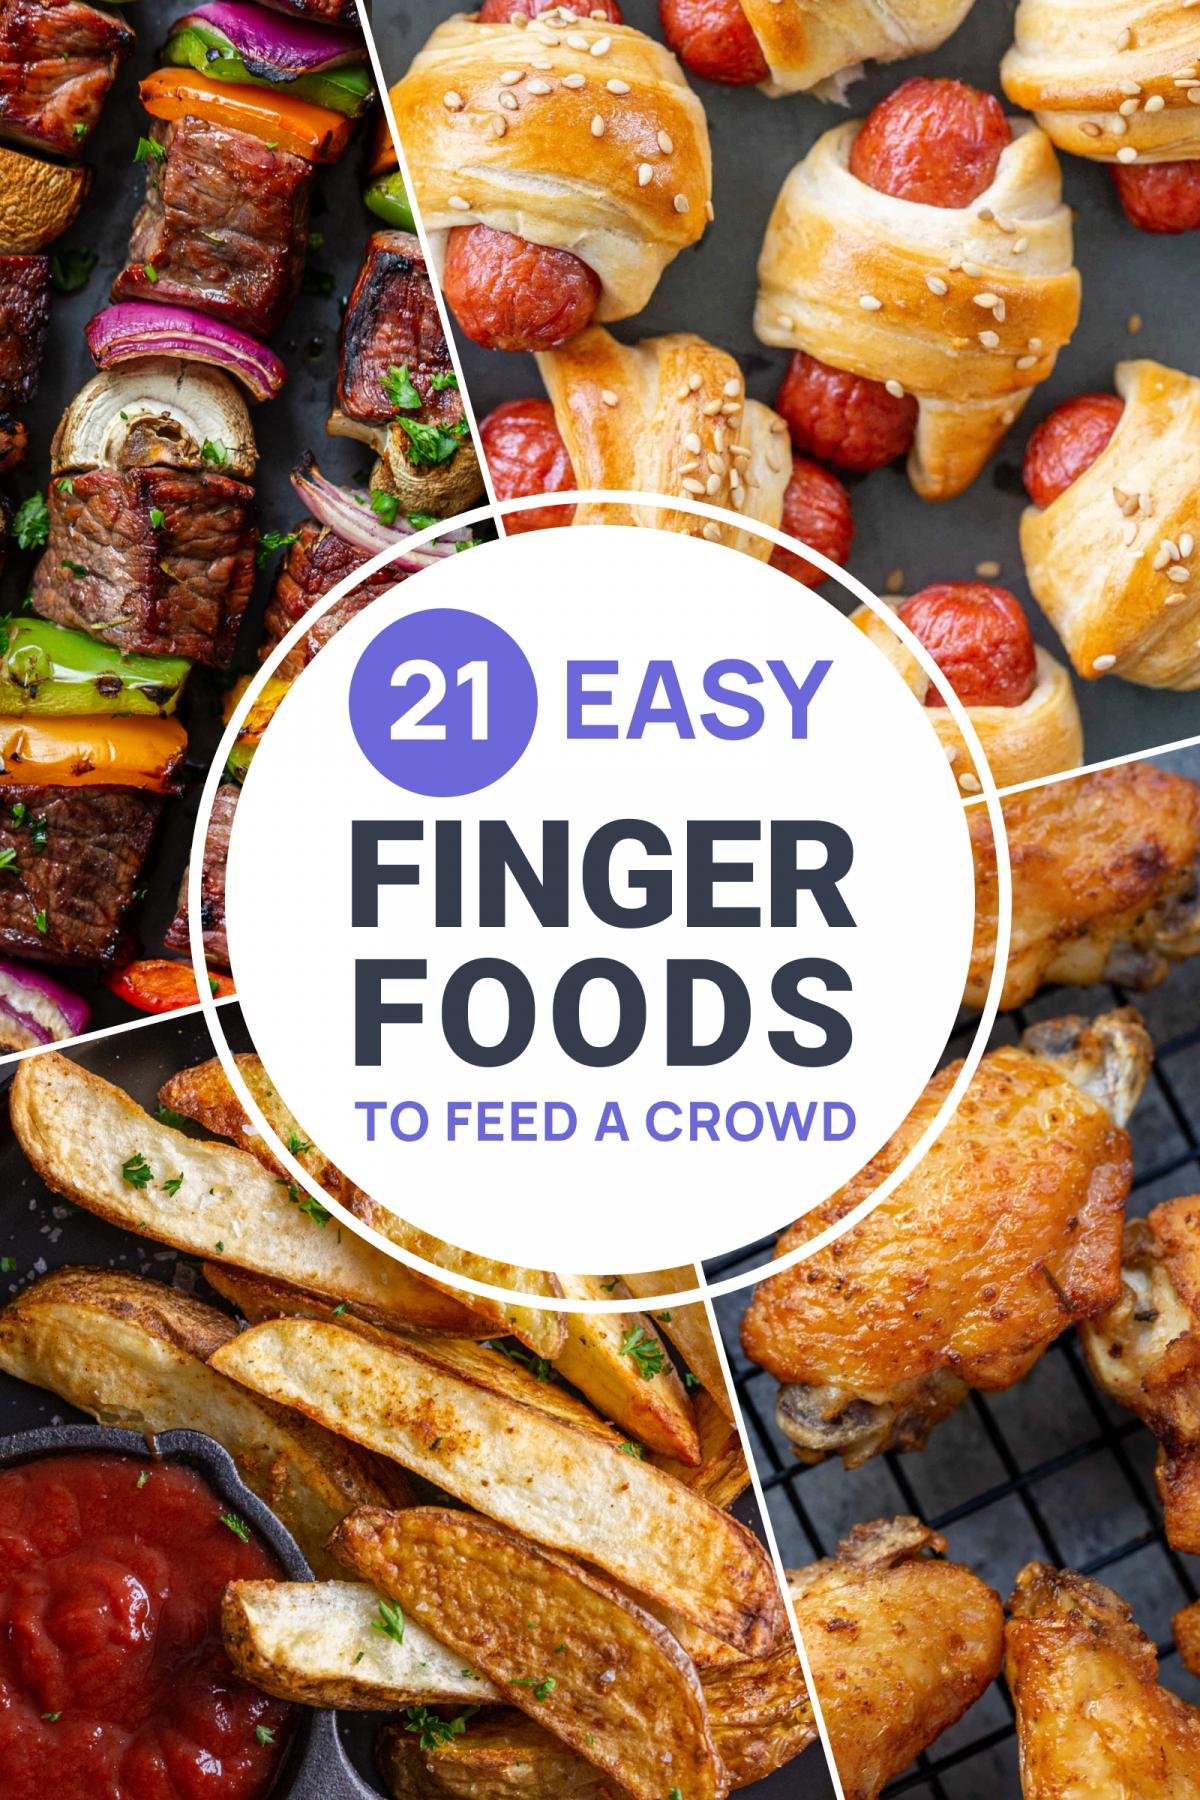 The Easiest, Quickest Way to Prep Pile of Bite-Sized Finger Foods